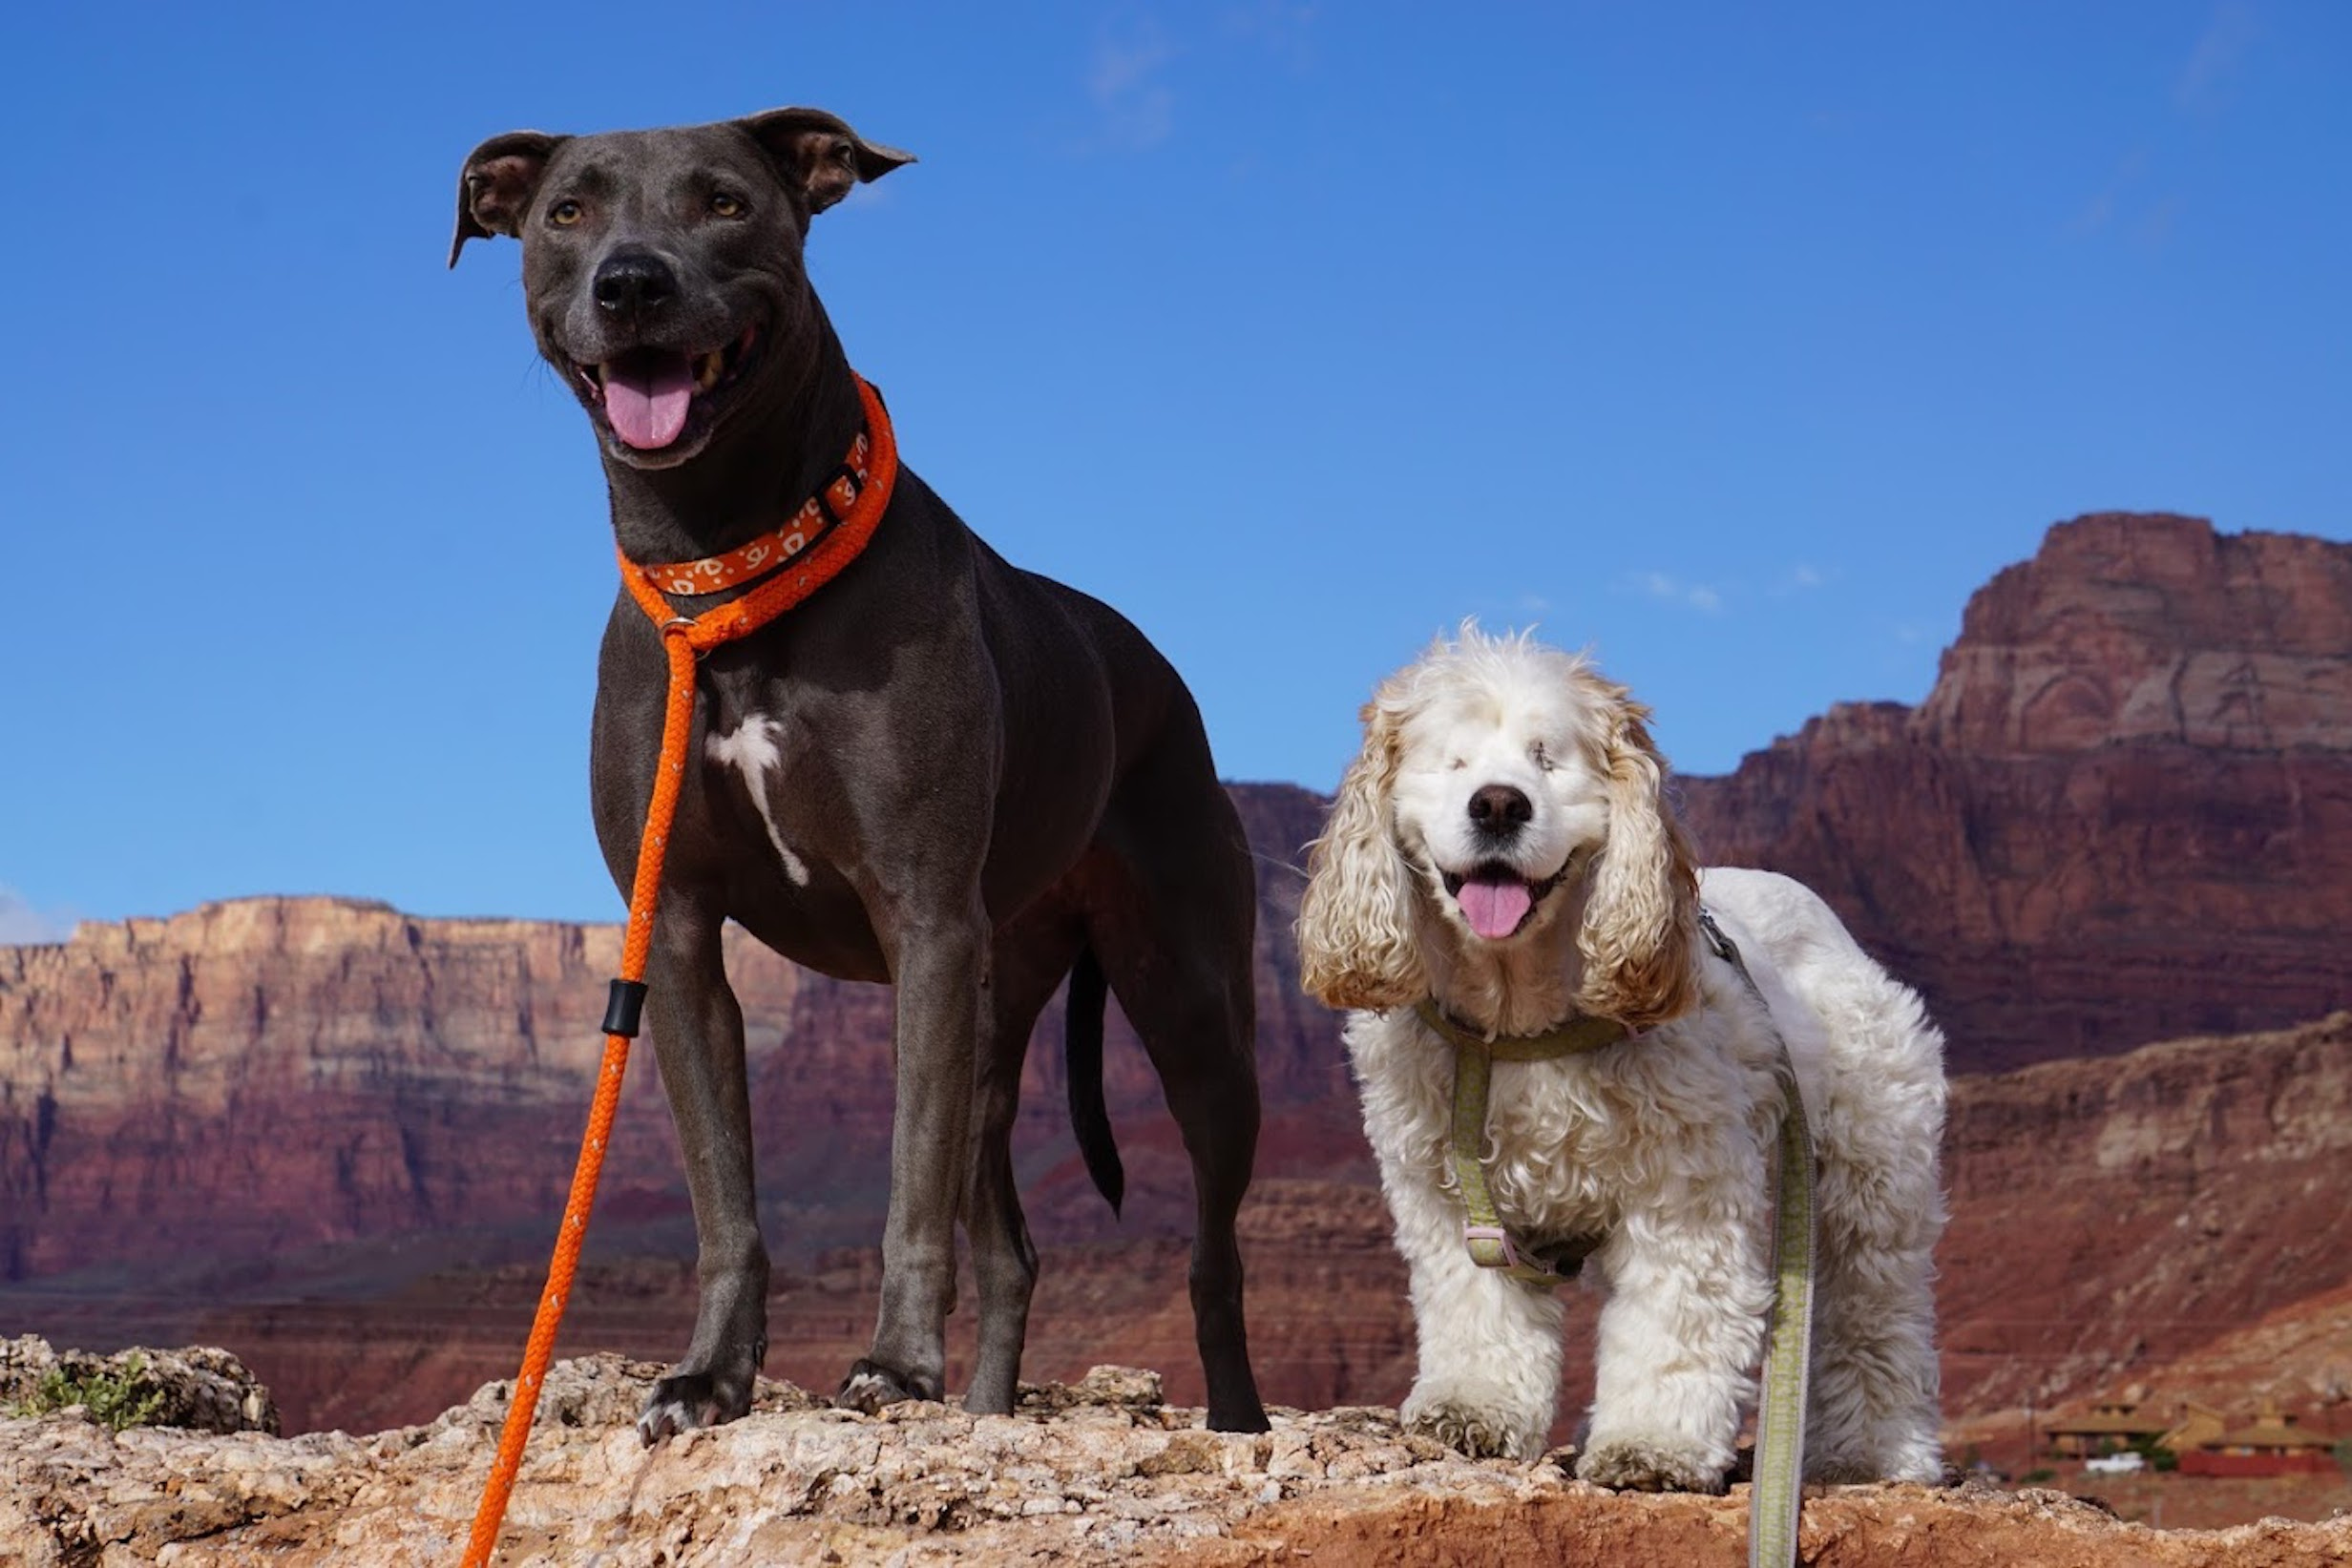 Blue Nose Lacy dog and a blind Cocker Spaniel standing on a mountain with the National Grand Canyon in the background with a vivid blue sky.